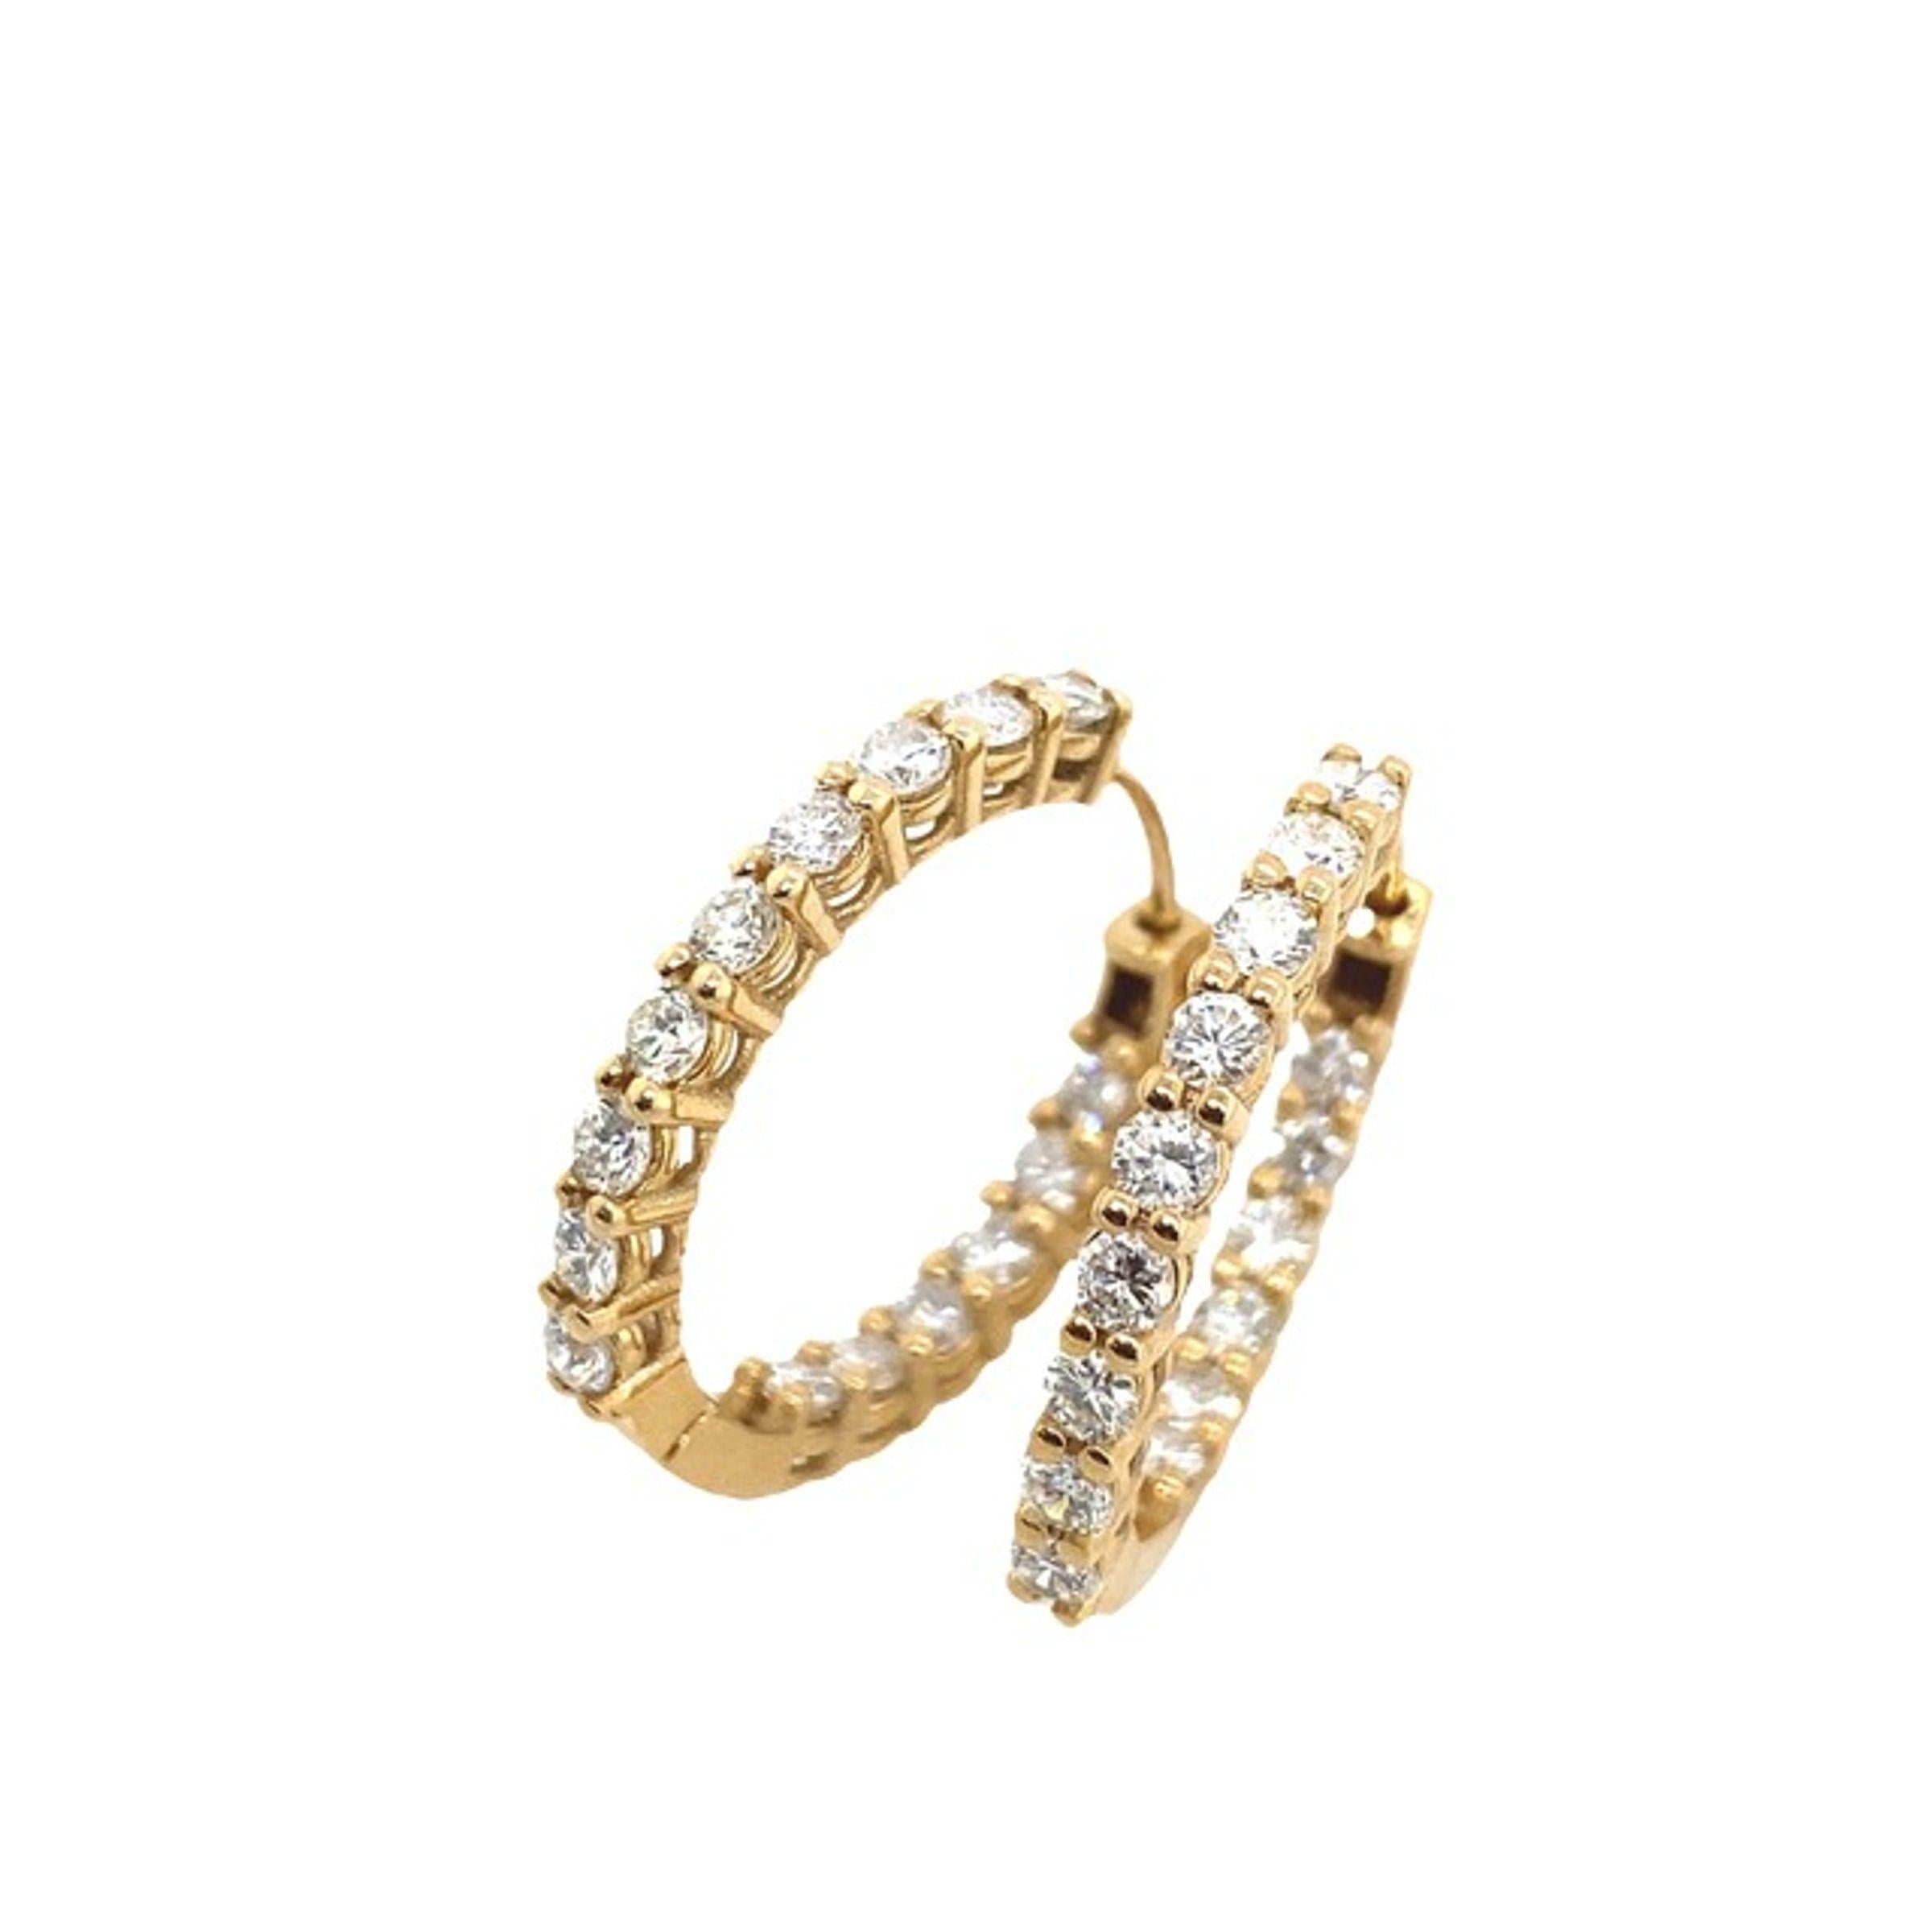 This pair of hinged hoop earrings was designed to be the perfect everyday earring.
It features a total of 1.80ct Diamonds mounted on a 14ct Yellow Gold hoop.
It is hinged, allowing it to swing from the ear.

Additional Information:
Earrings